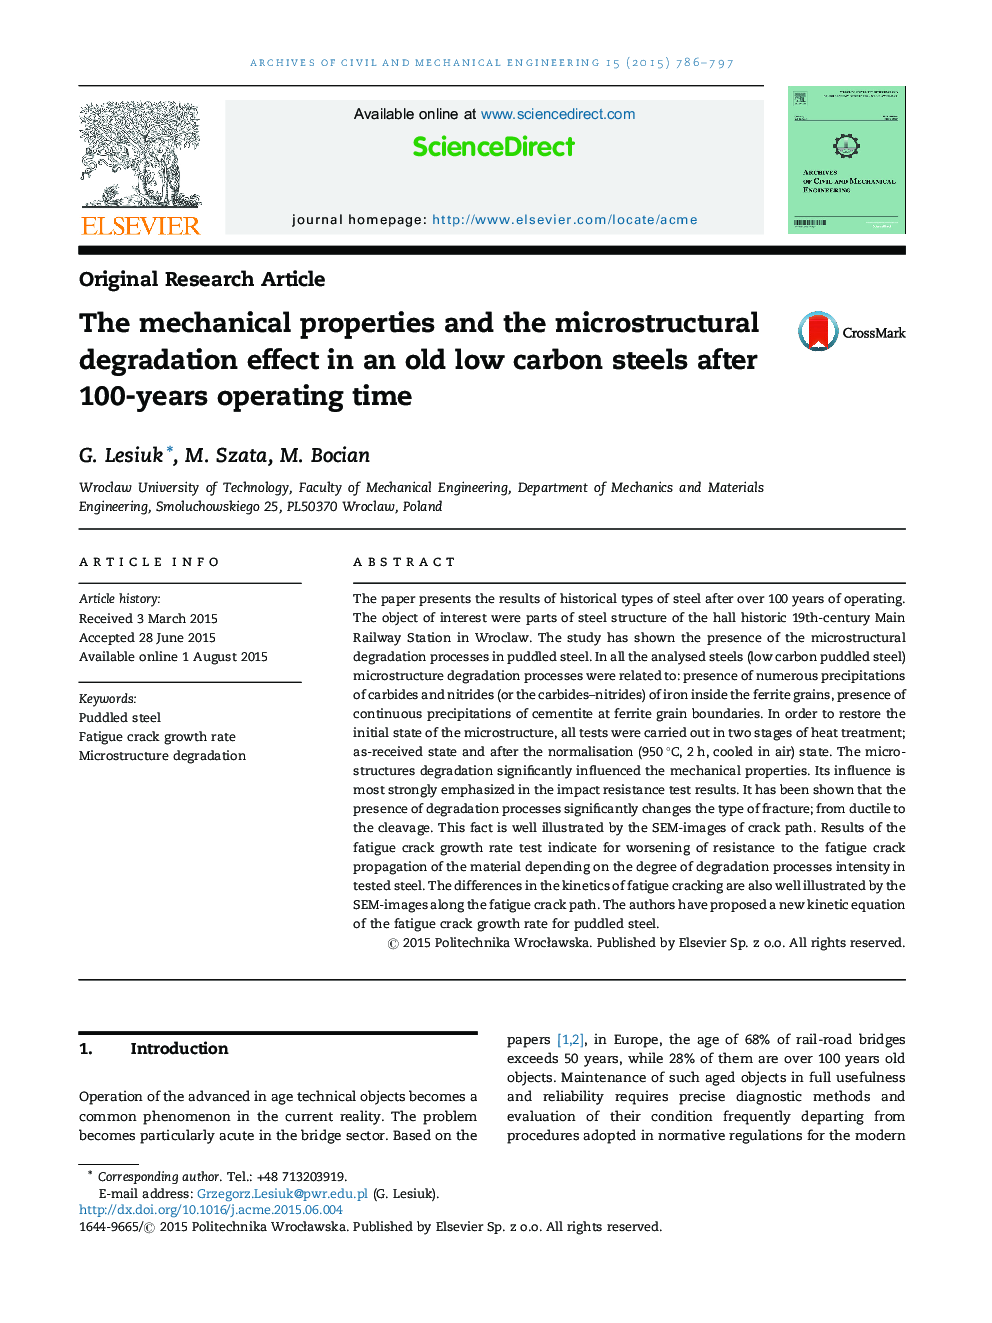 The mechanical properties and the microstructural degradation effect in an old low carbon steels after 100-years operating time